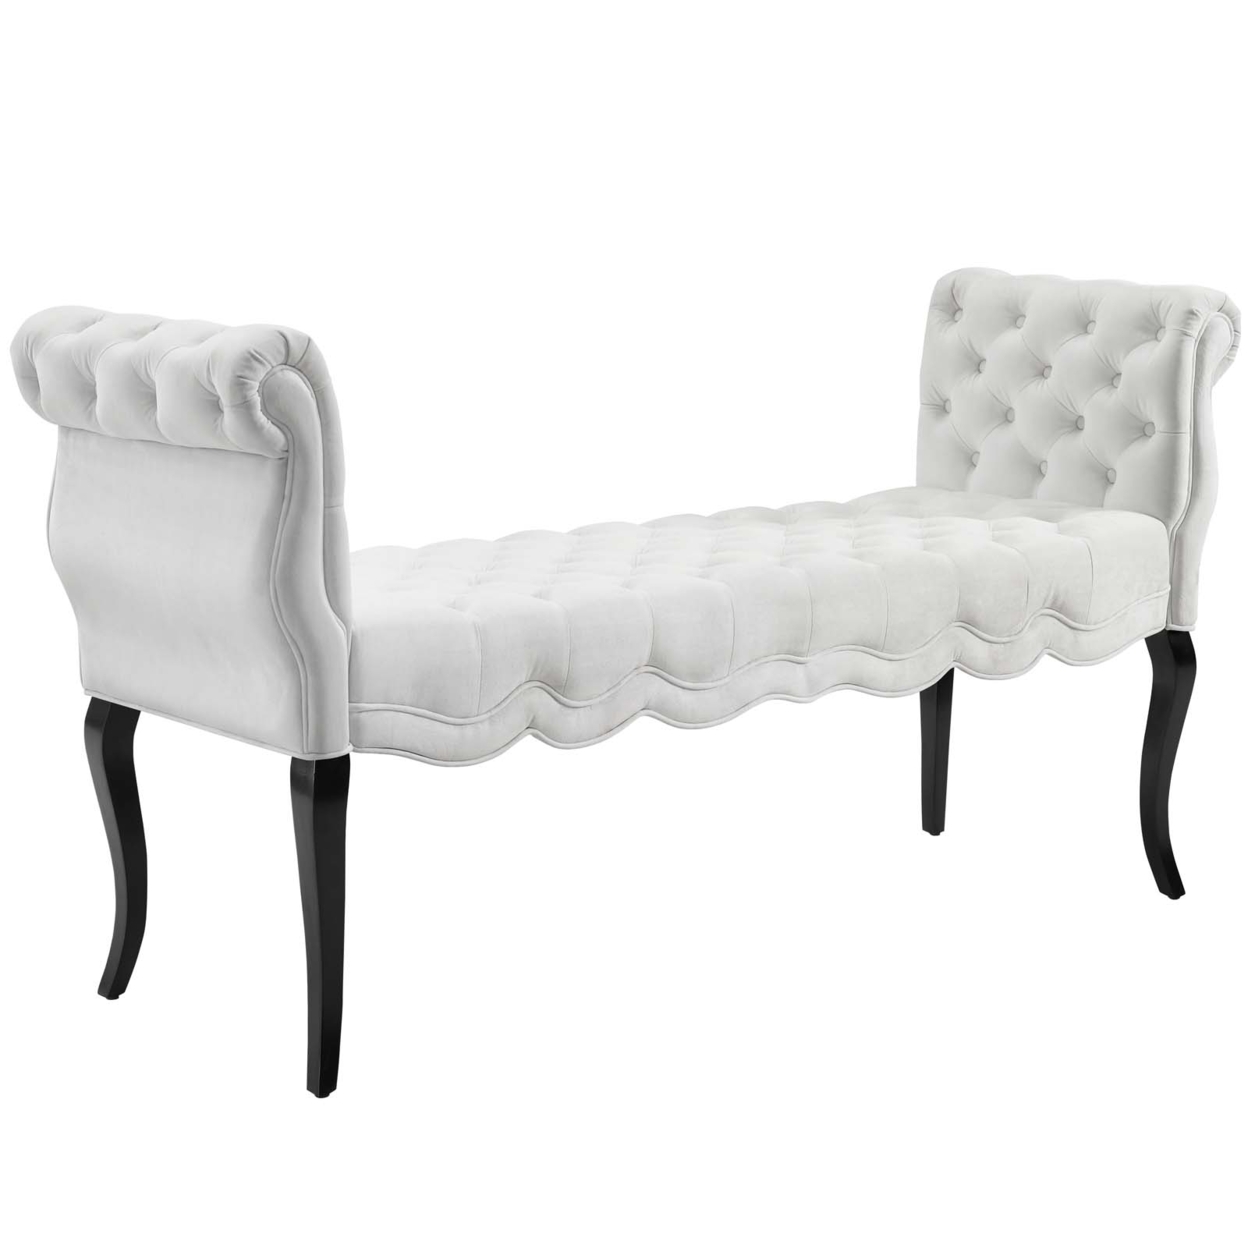 Adelia Chesterfield Style Button Tufted Performance Velvet Bench,White